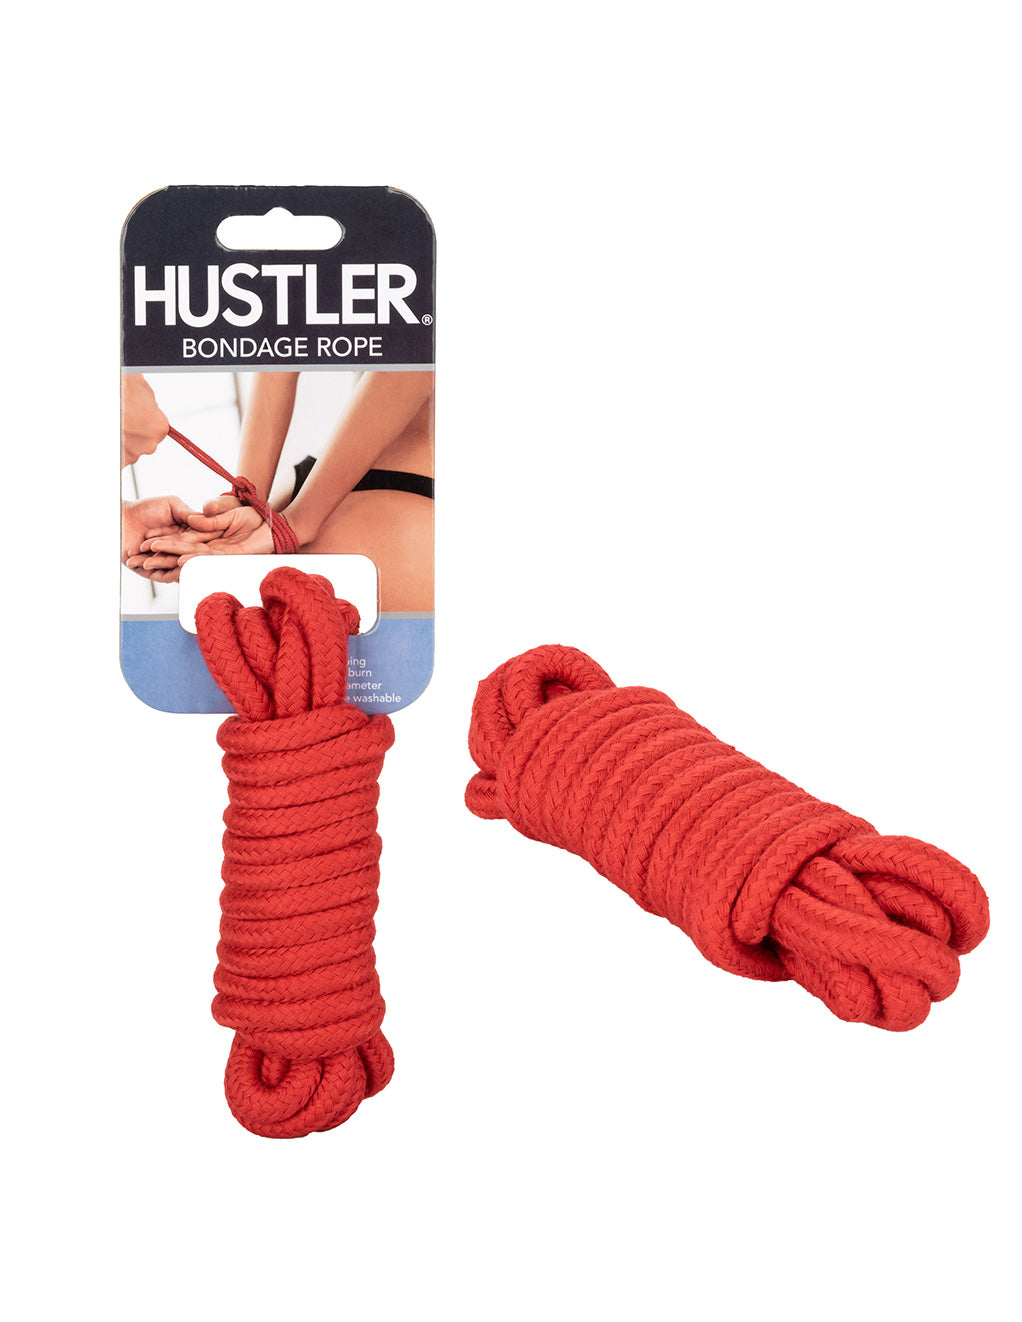 Hustler® Bondage Rope- Red- With package